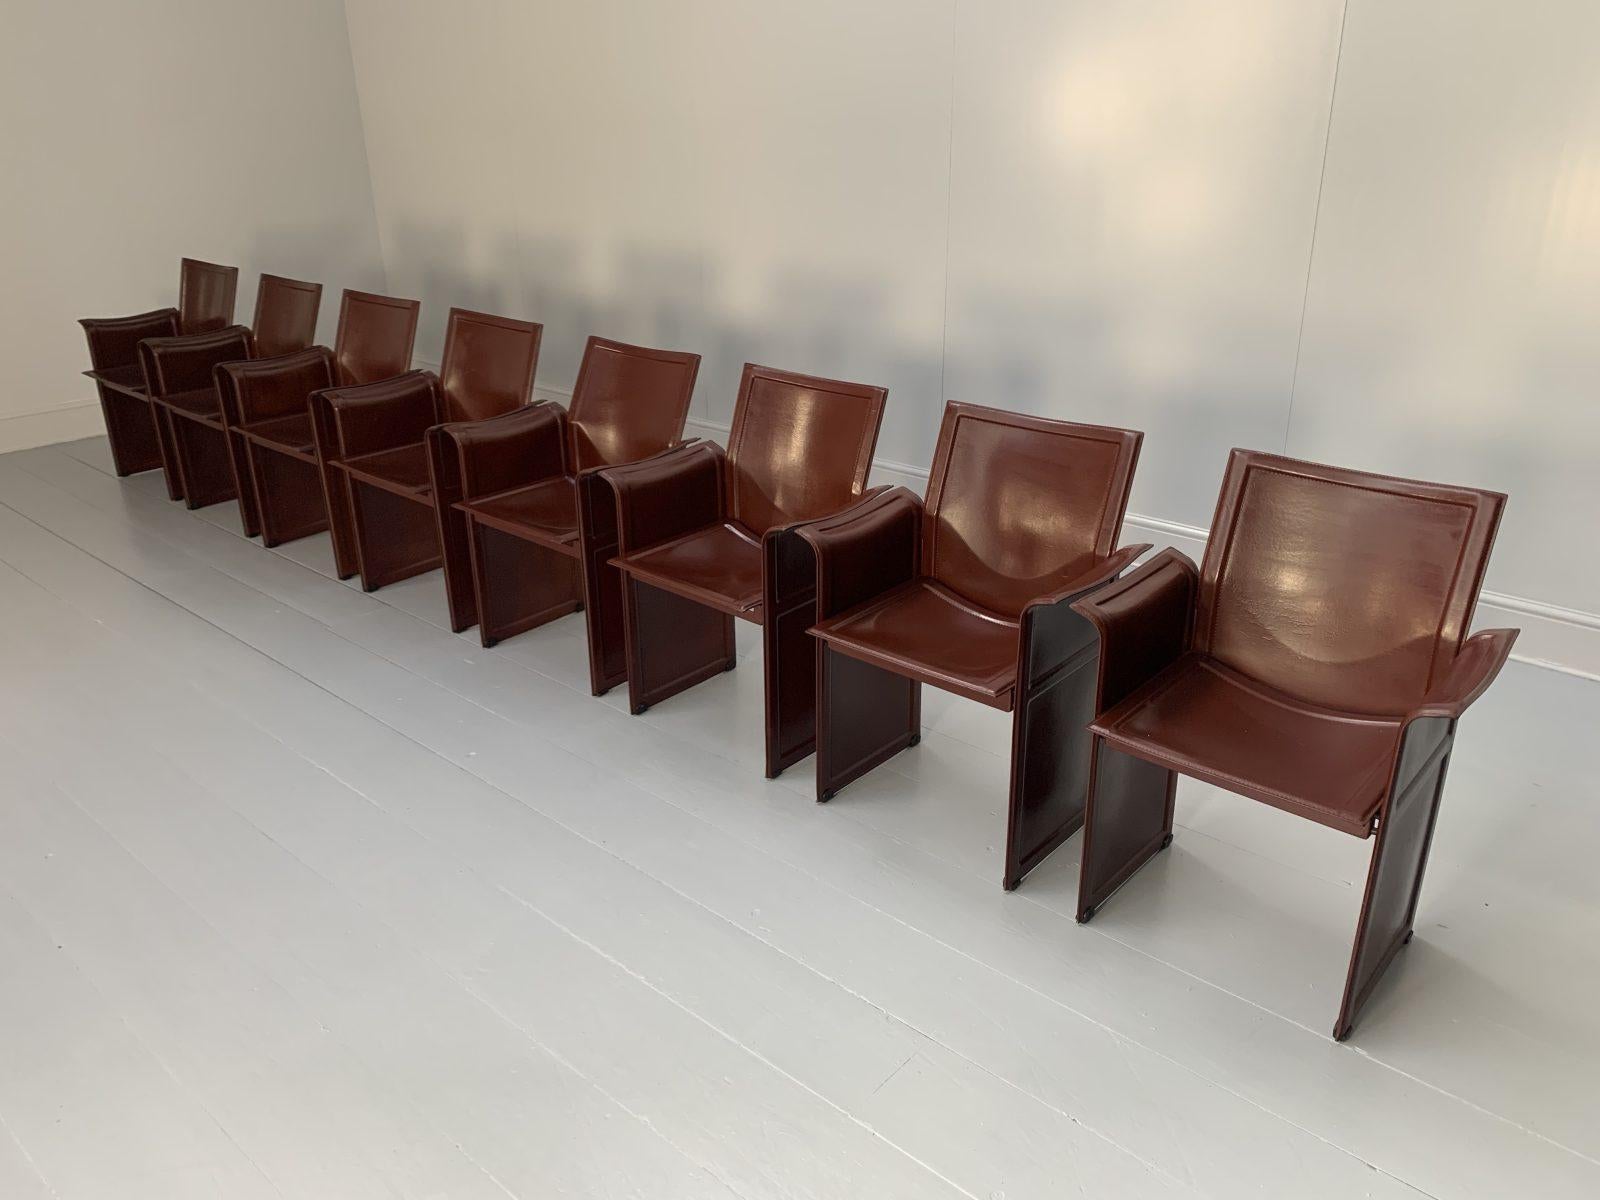 8 Matteo Grassi “Korium” Dining Chairs, in Brown Coach Leather In Good Condition For Sale In Barrowford, GB